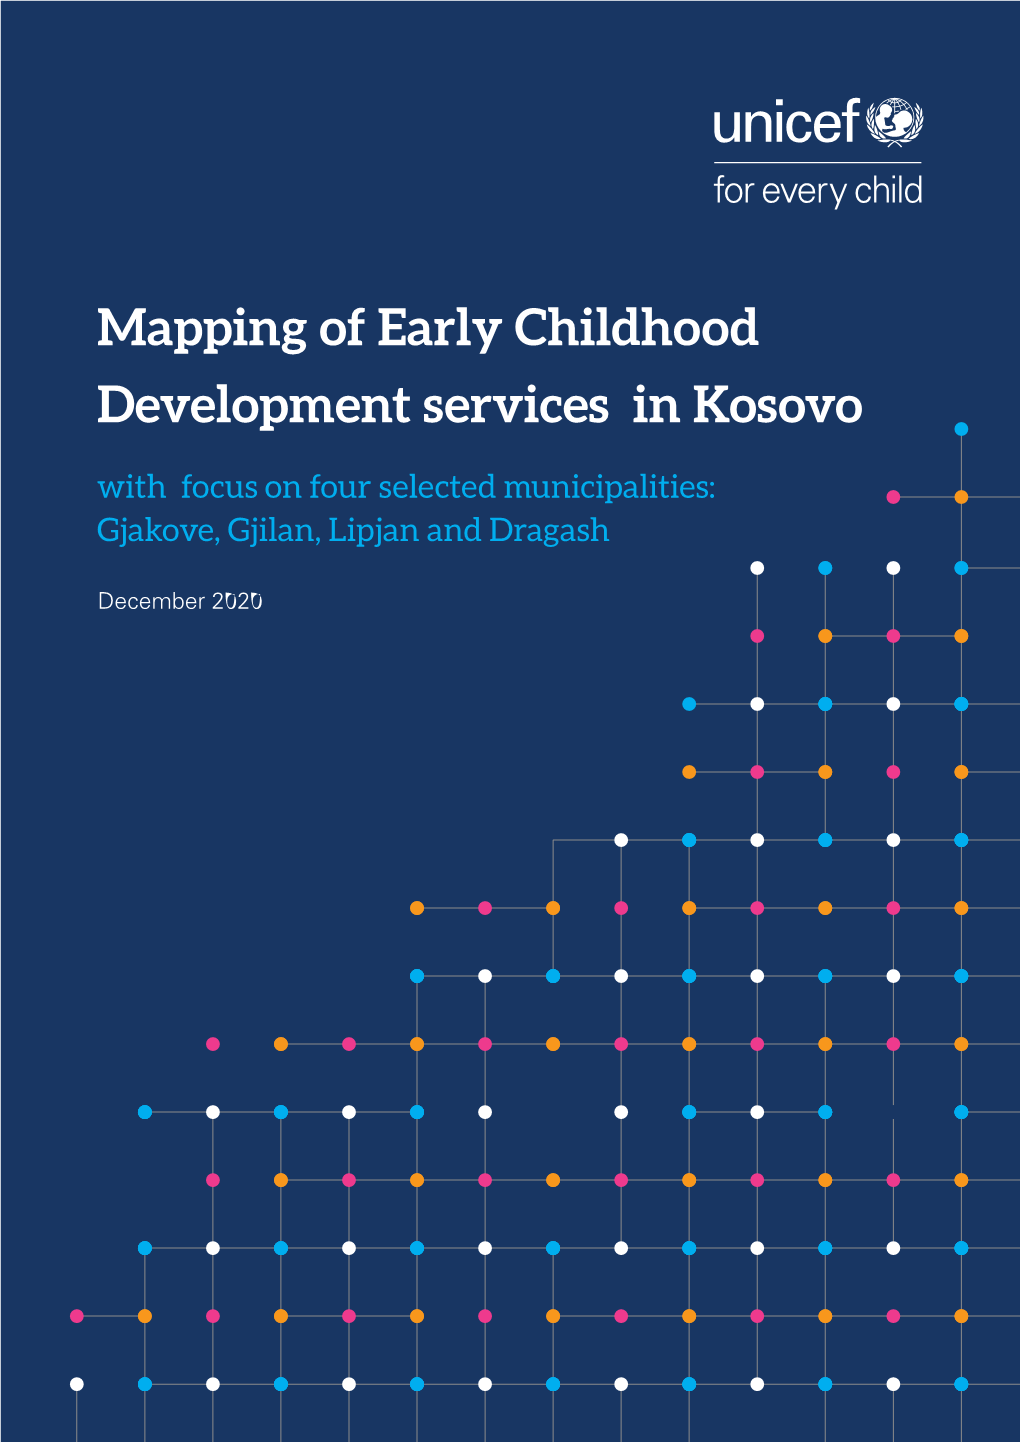 Mapping of Early Childhood Development Services in Kosovo with Focus on Four Selected Municipalities: Gjakove, Gjilan, Lipjan and Dragash